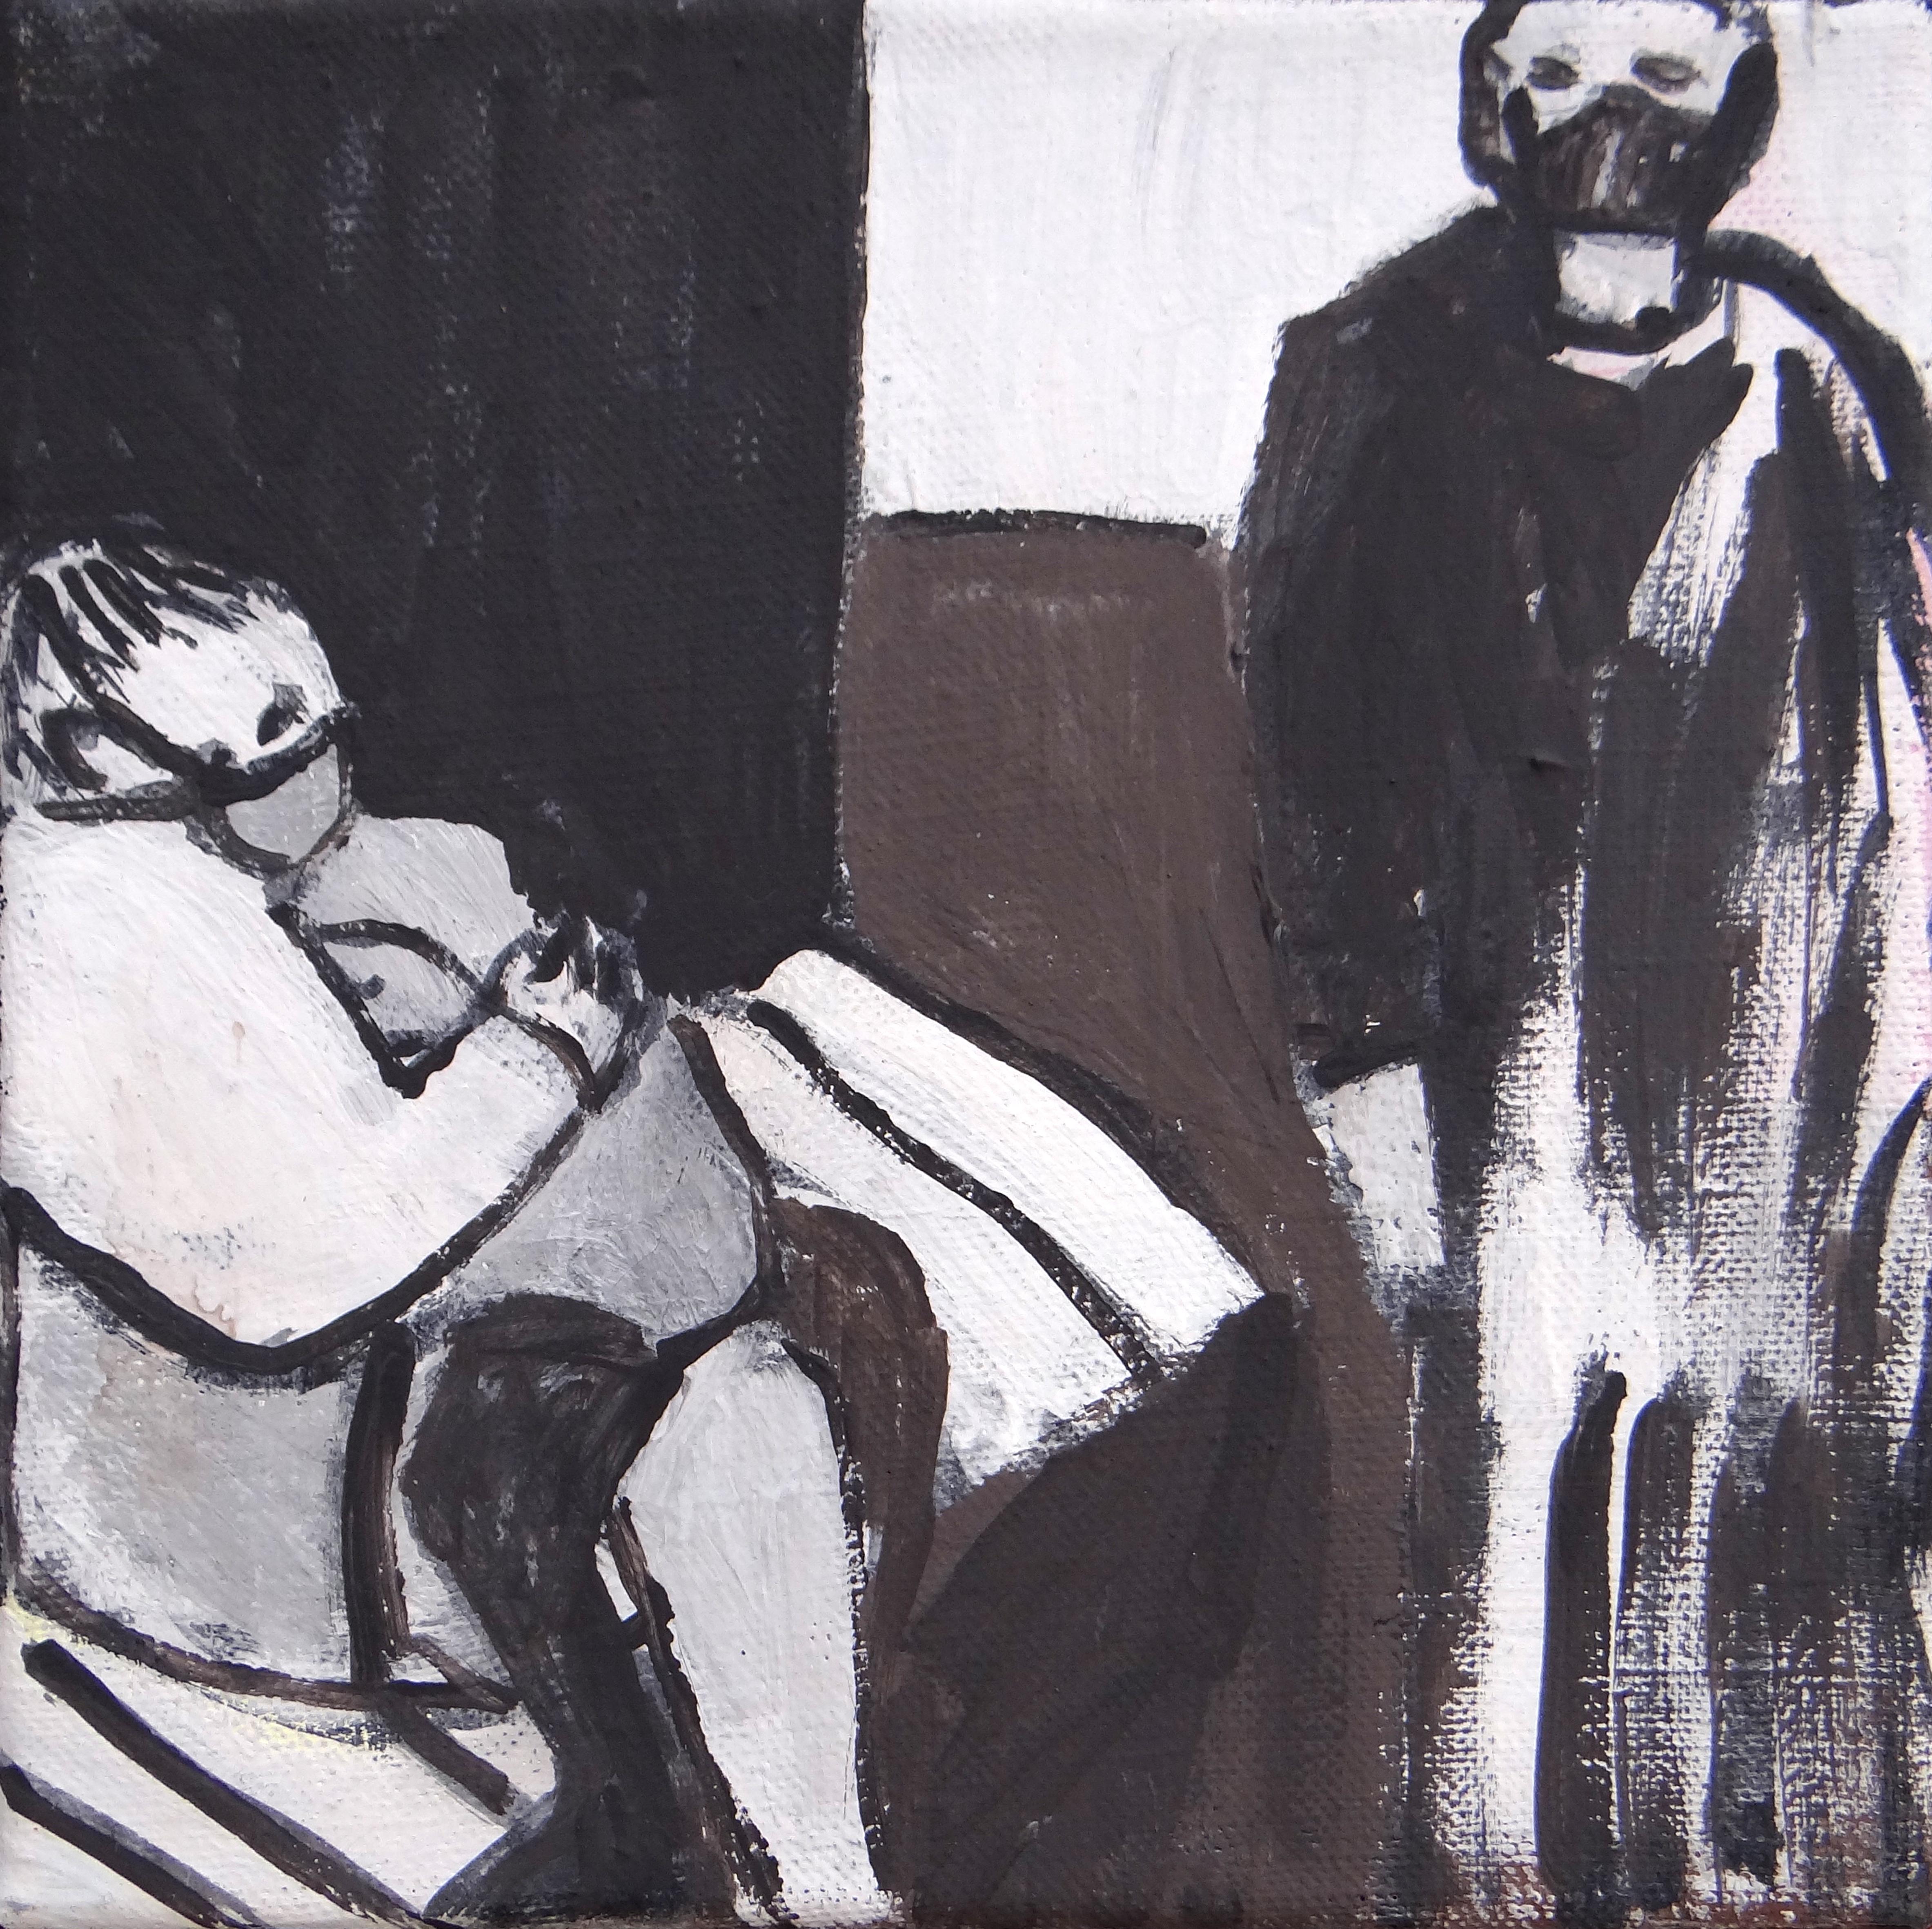 Joanna Mrozowska Figurative Painting - Waiting Room 1 - Contemporary Expressive Symbolic Black-White and Brown Painting